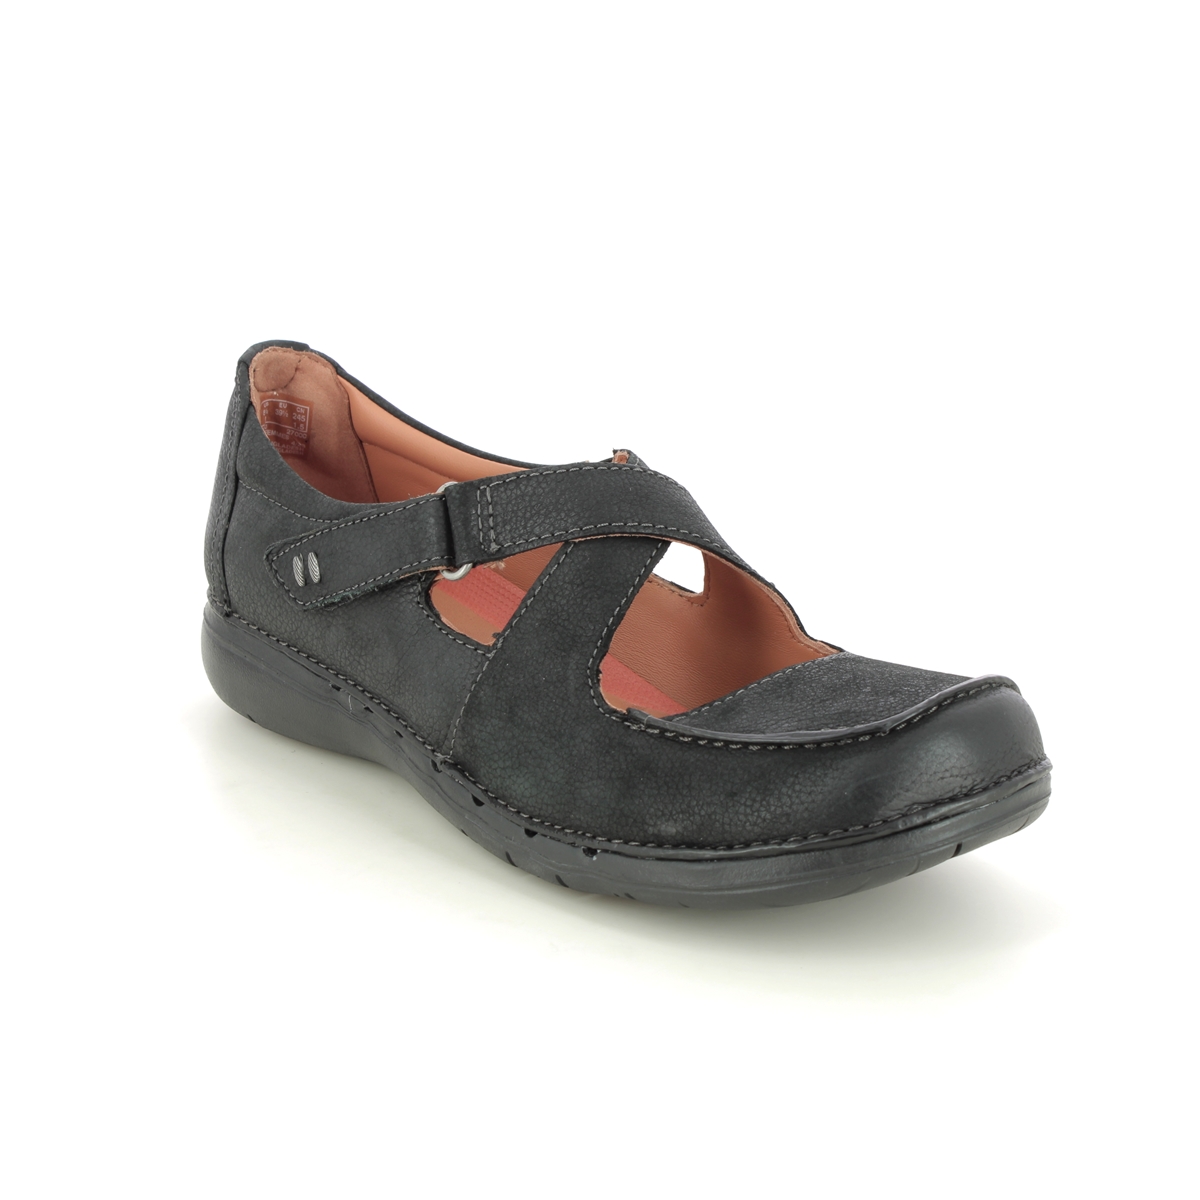 Clarks Un Loop Strap Black Leather Womens Mary Jane Shoes 749704D In Size 5 In Plain Black Leather